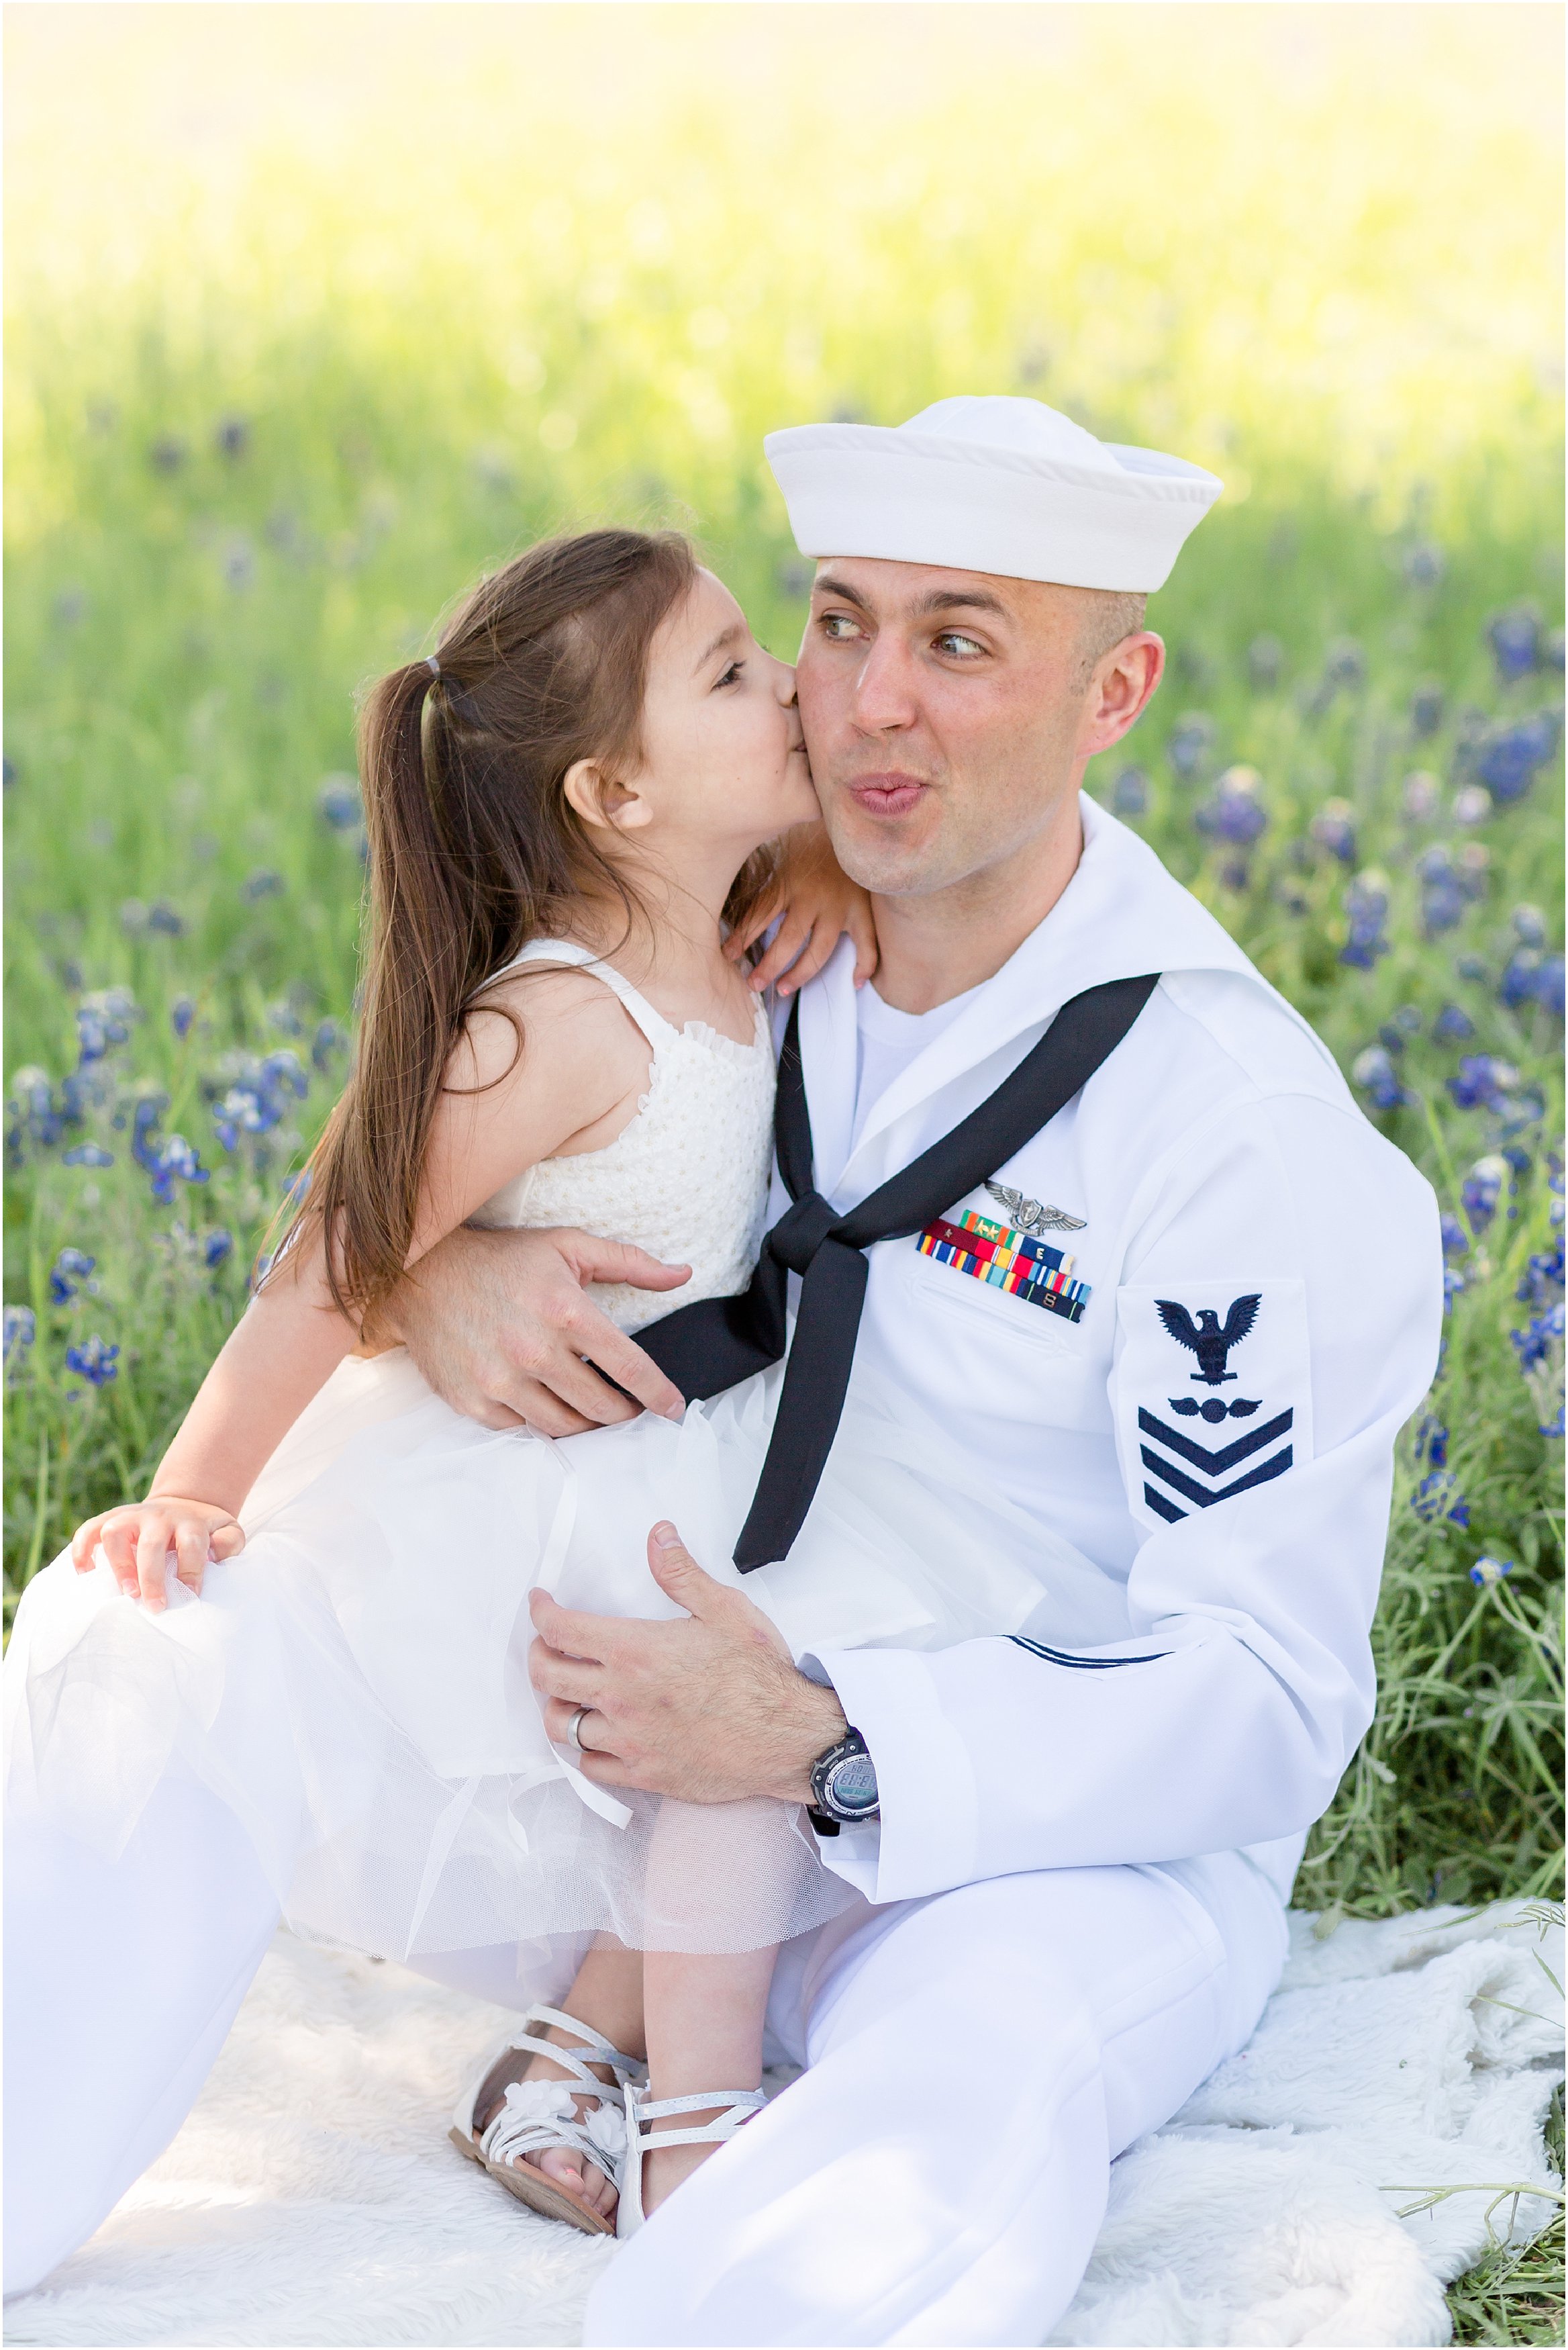 military dad and daughter in bluebonnets